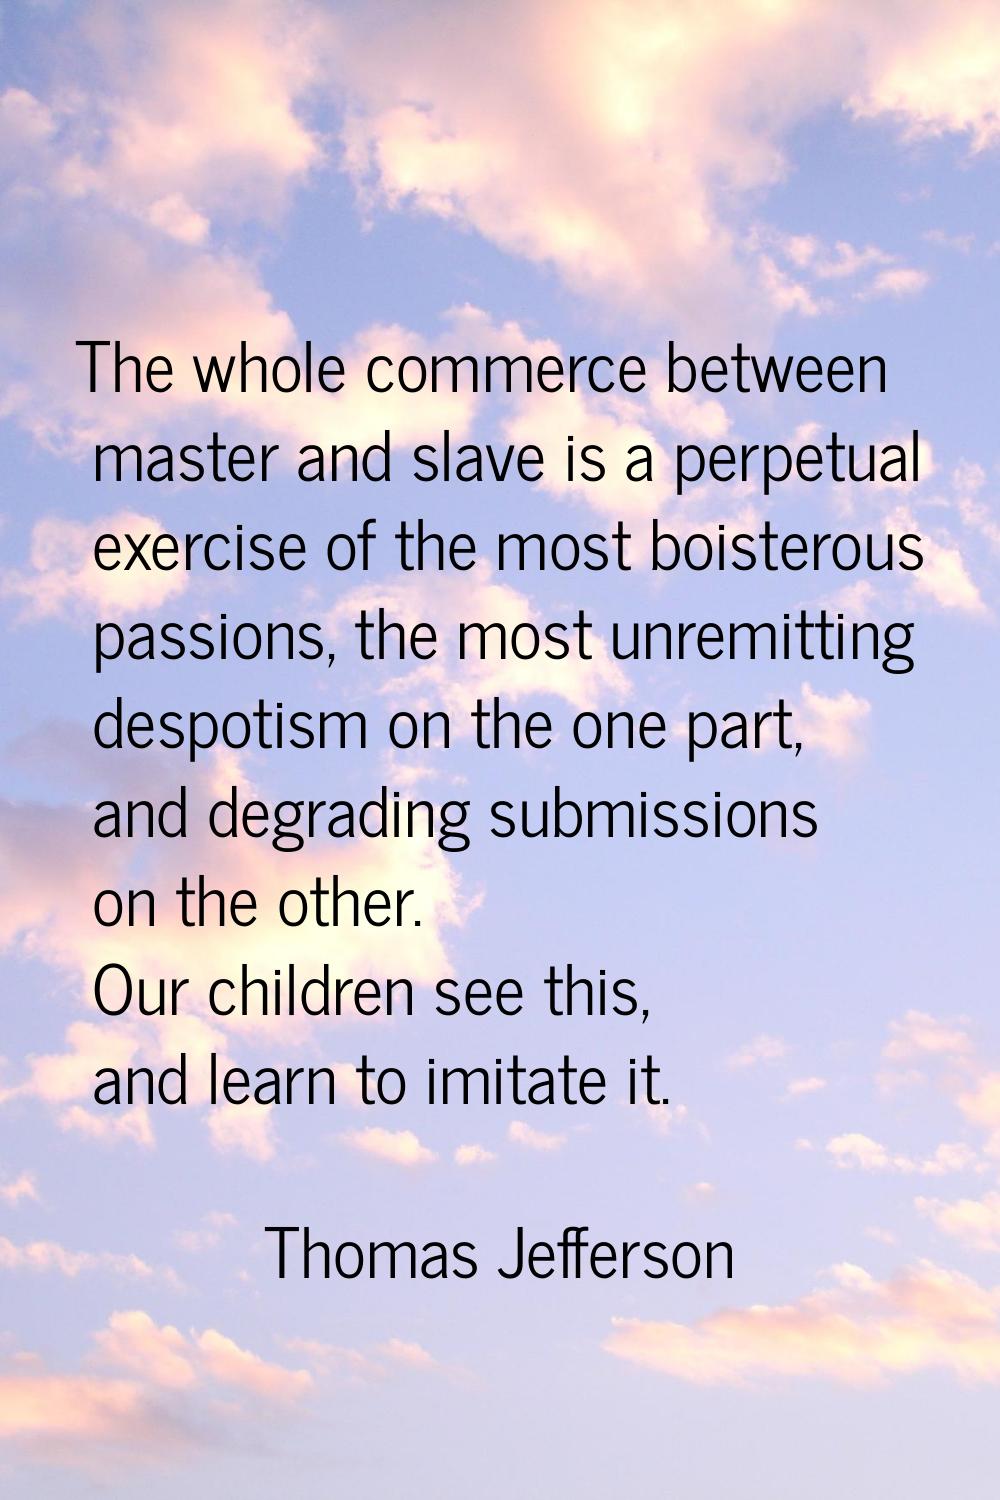 The whole commerce between master and slave is a perpetual exercise of the most boisterous passions